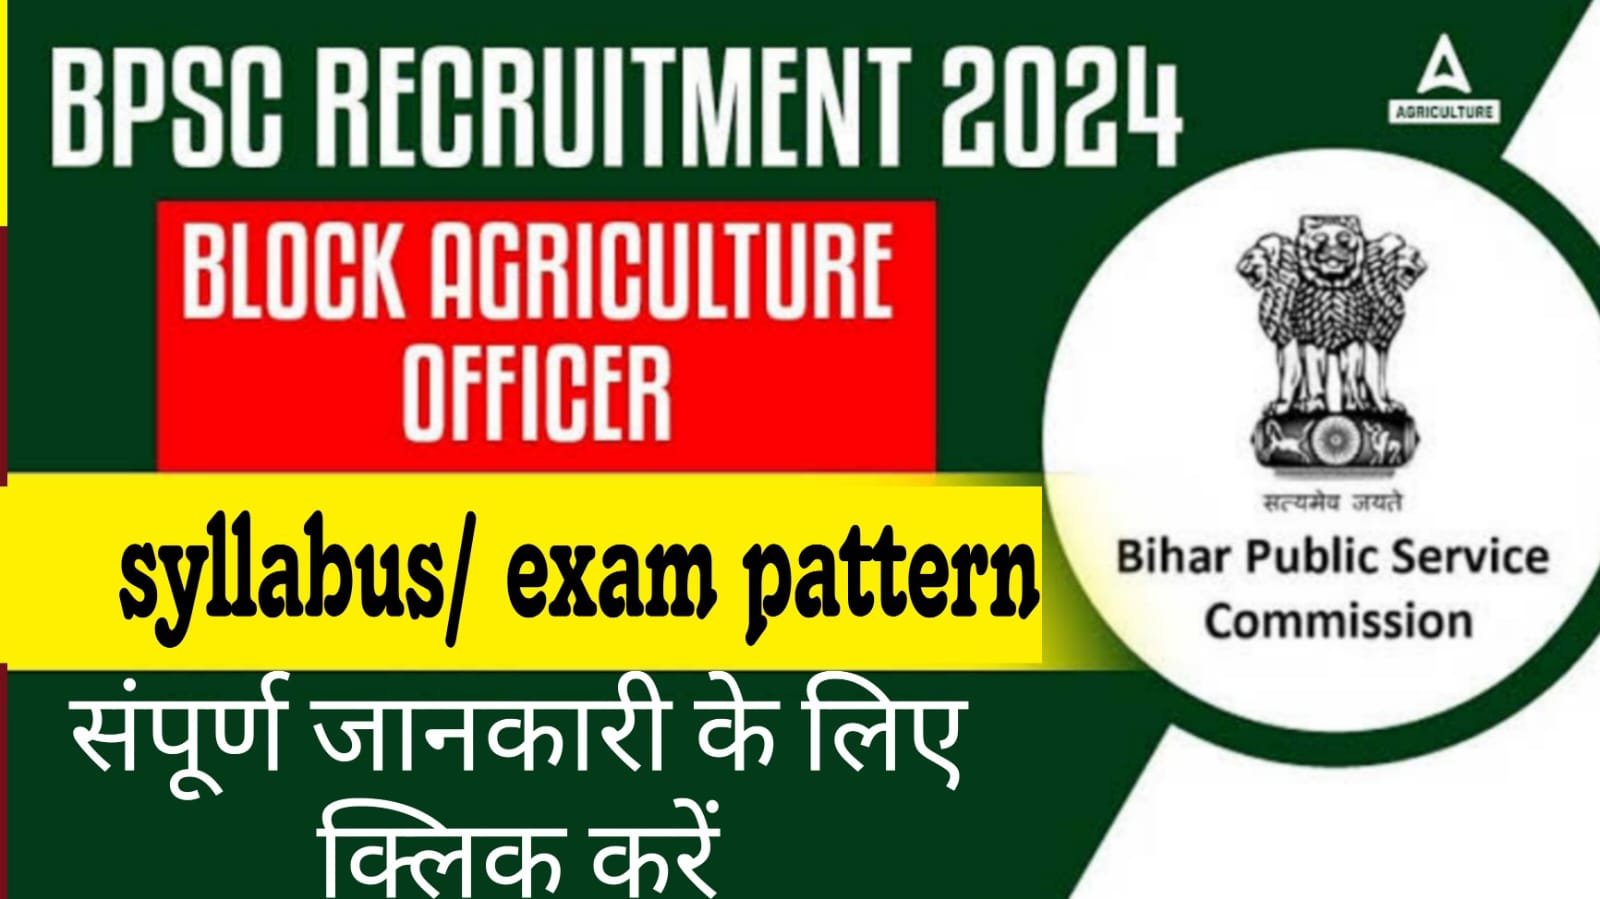 BPSC Block Agriculture Officer Syllabus